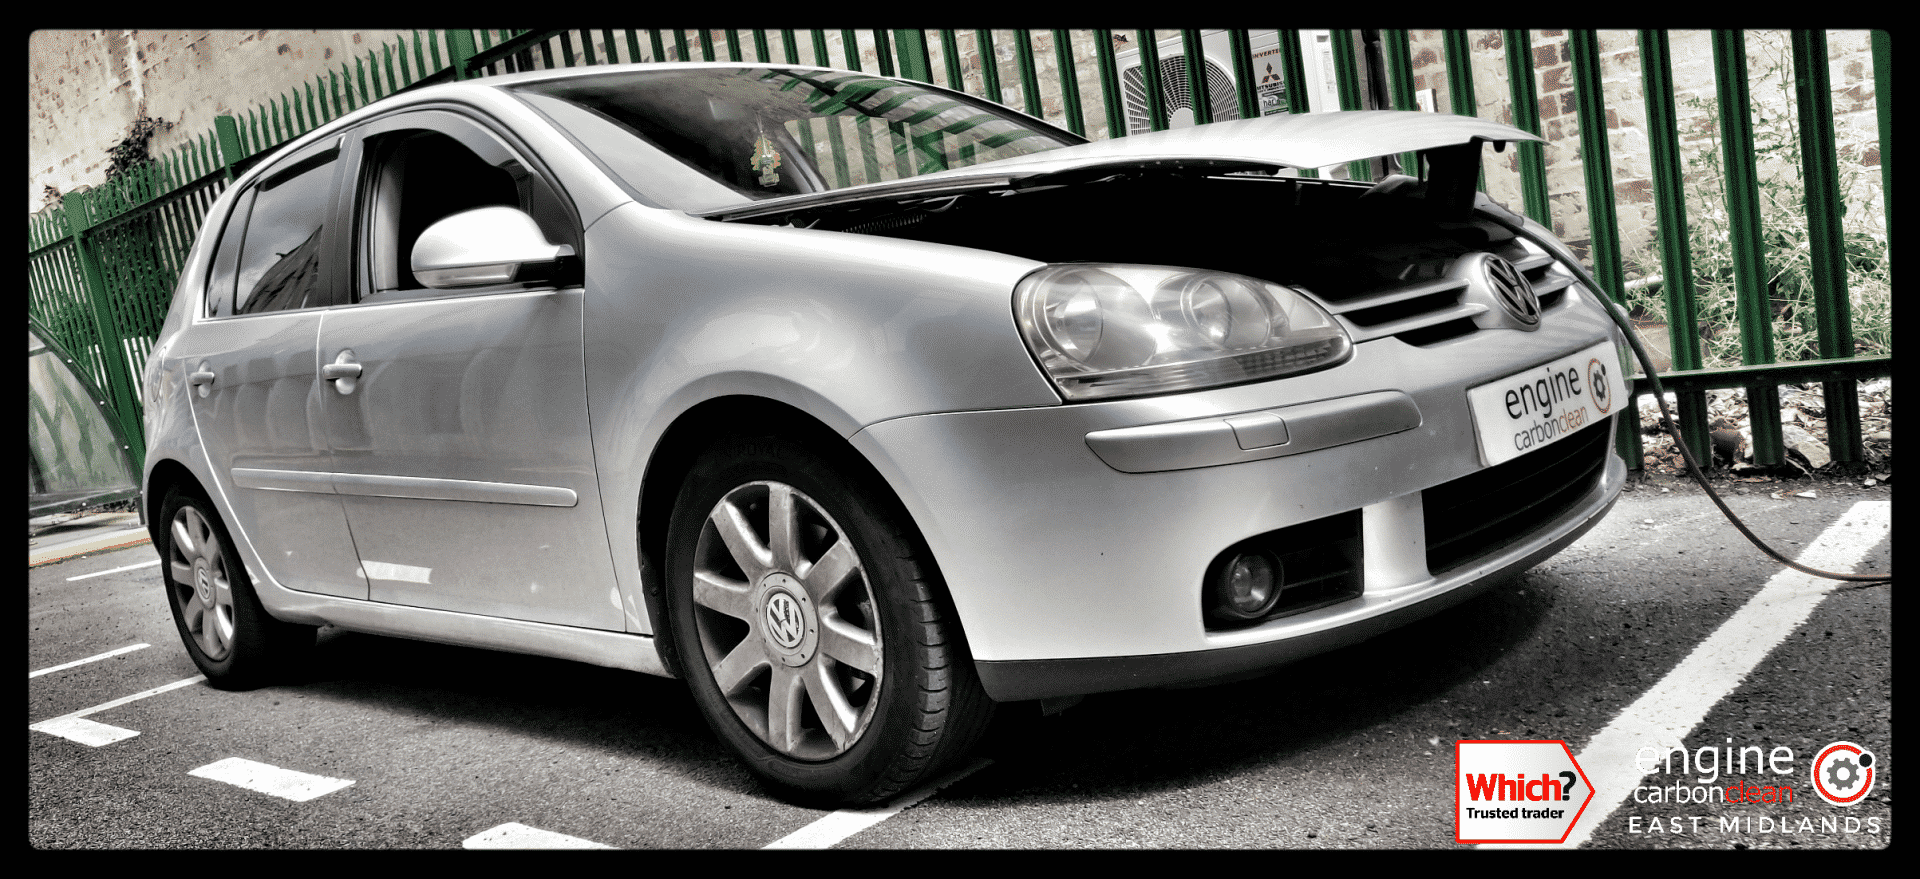 Diagnostic Consultation and Engine Carbon Clean on a VW Golf 2.0 TDI (2006 - 160,139 miles)